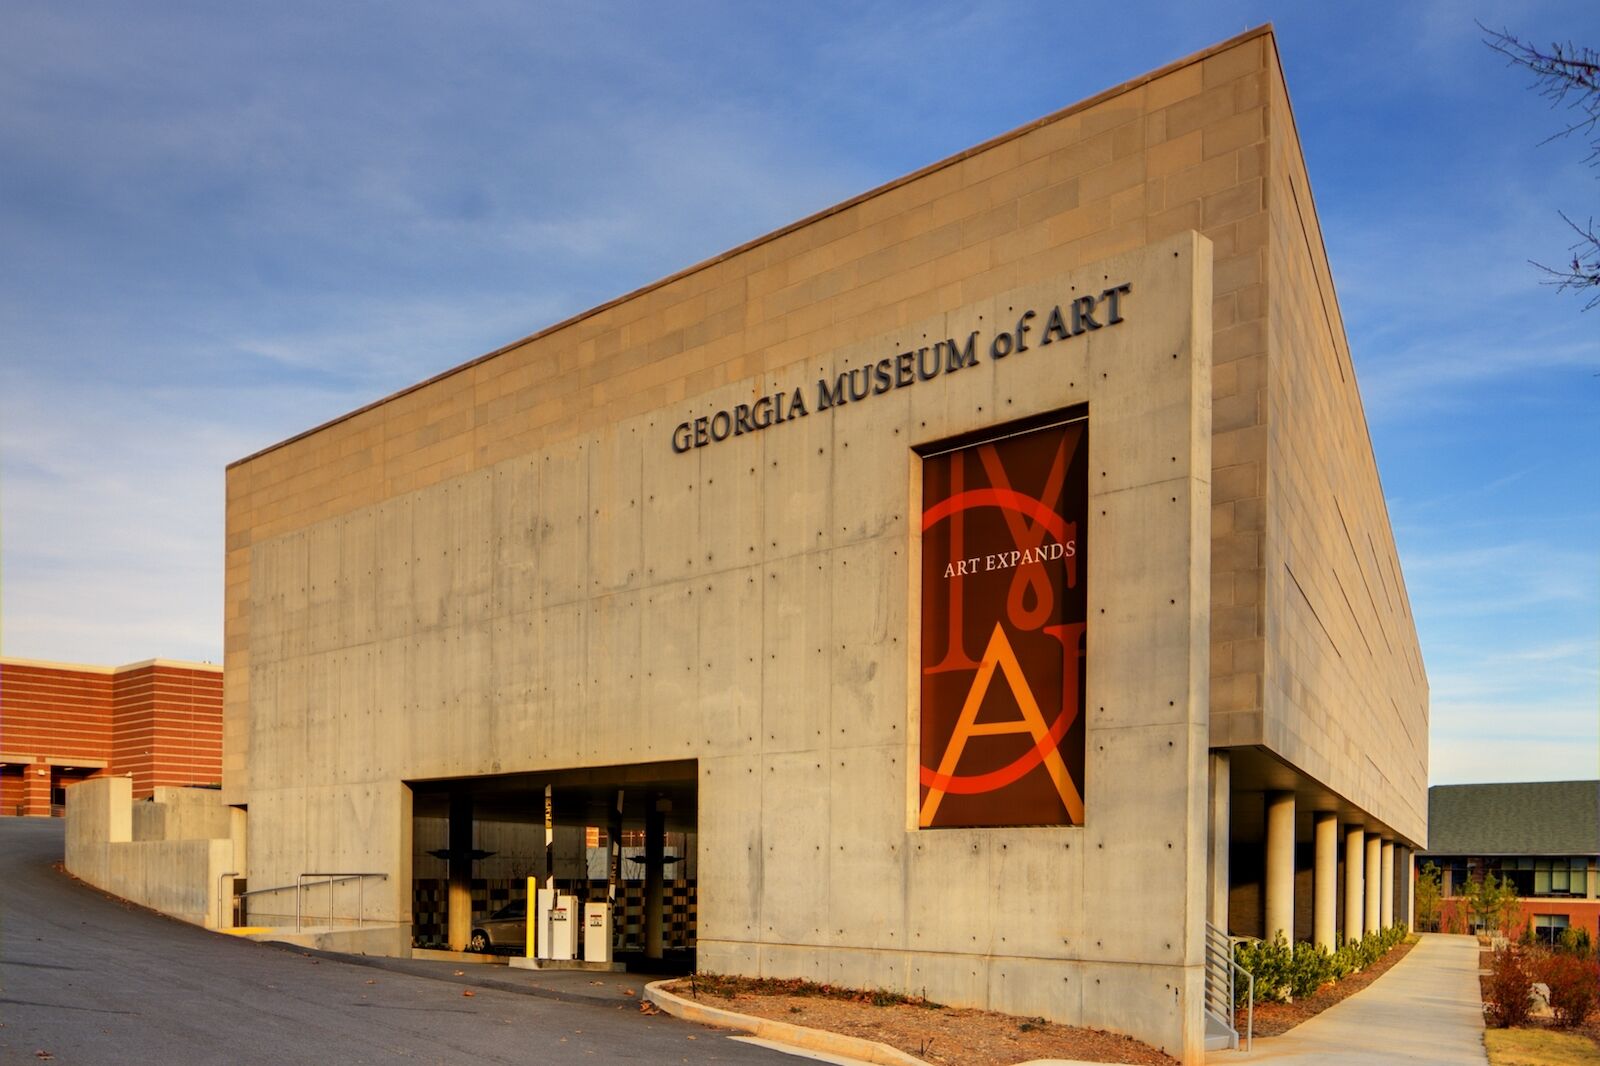 ATHENS, GEORGIA - DECEMBER 3: Georgia Museum of art on December 3, 2011 in Athens, GA. Associated with the University of Georgia, it has been the official state museum of art since 1982.